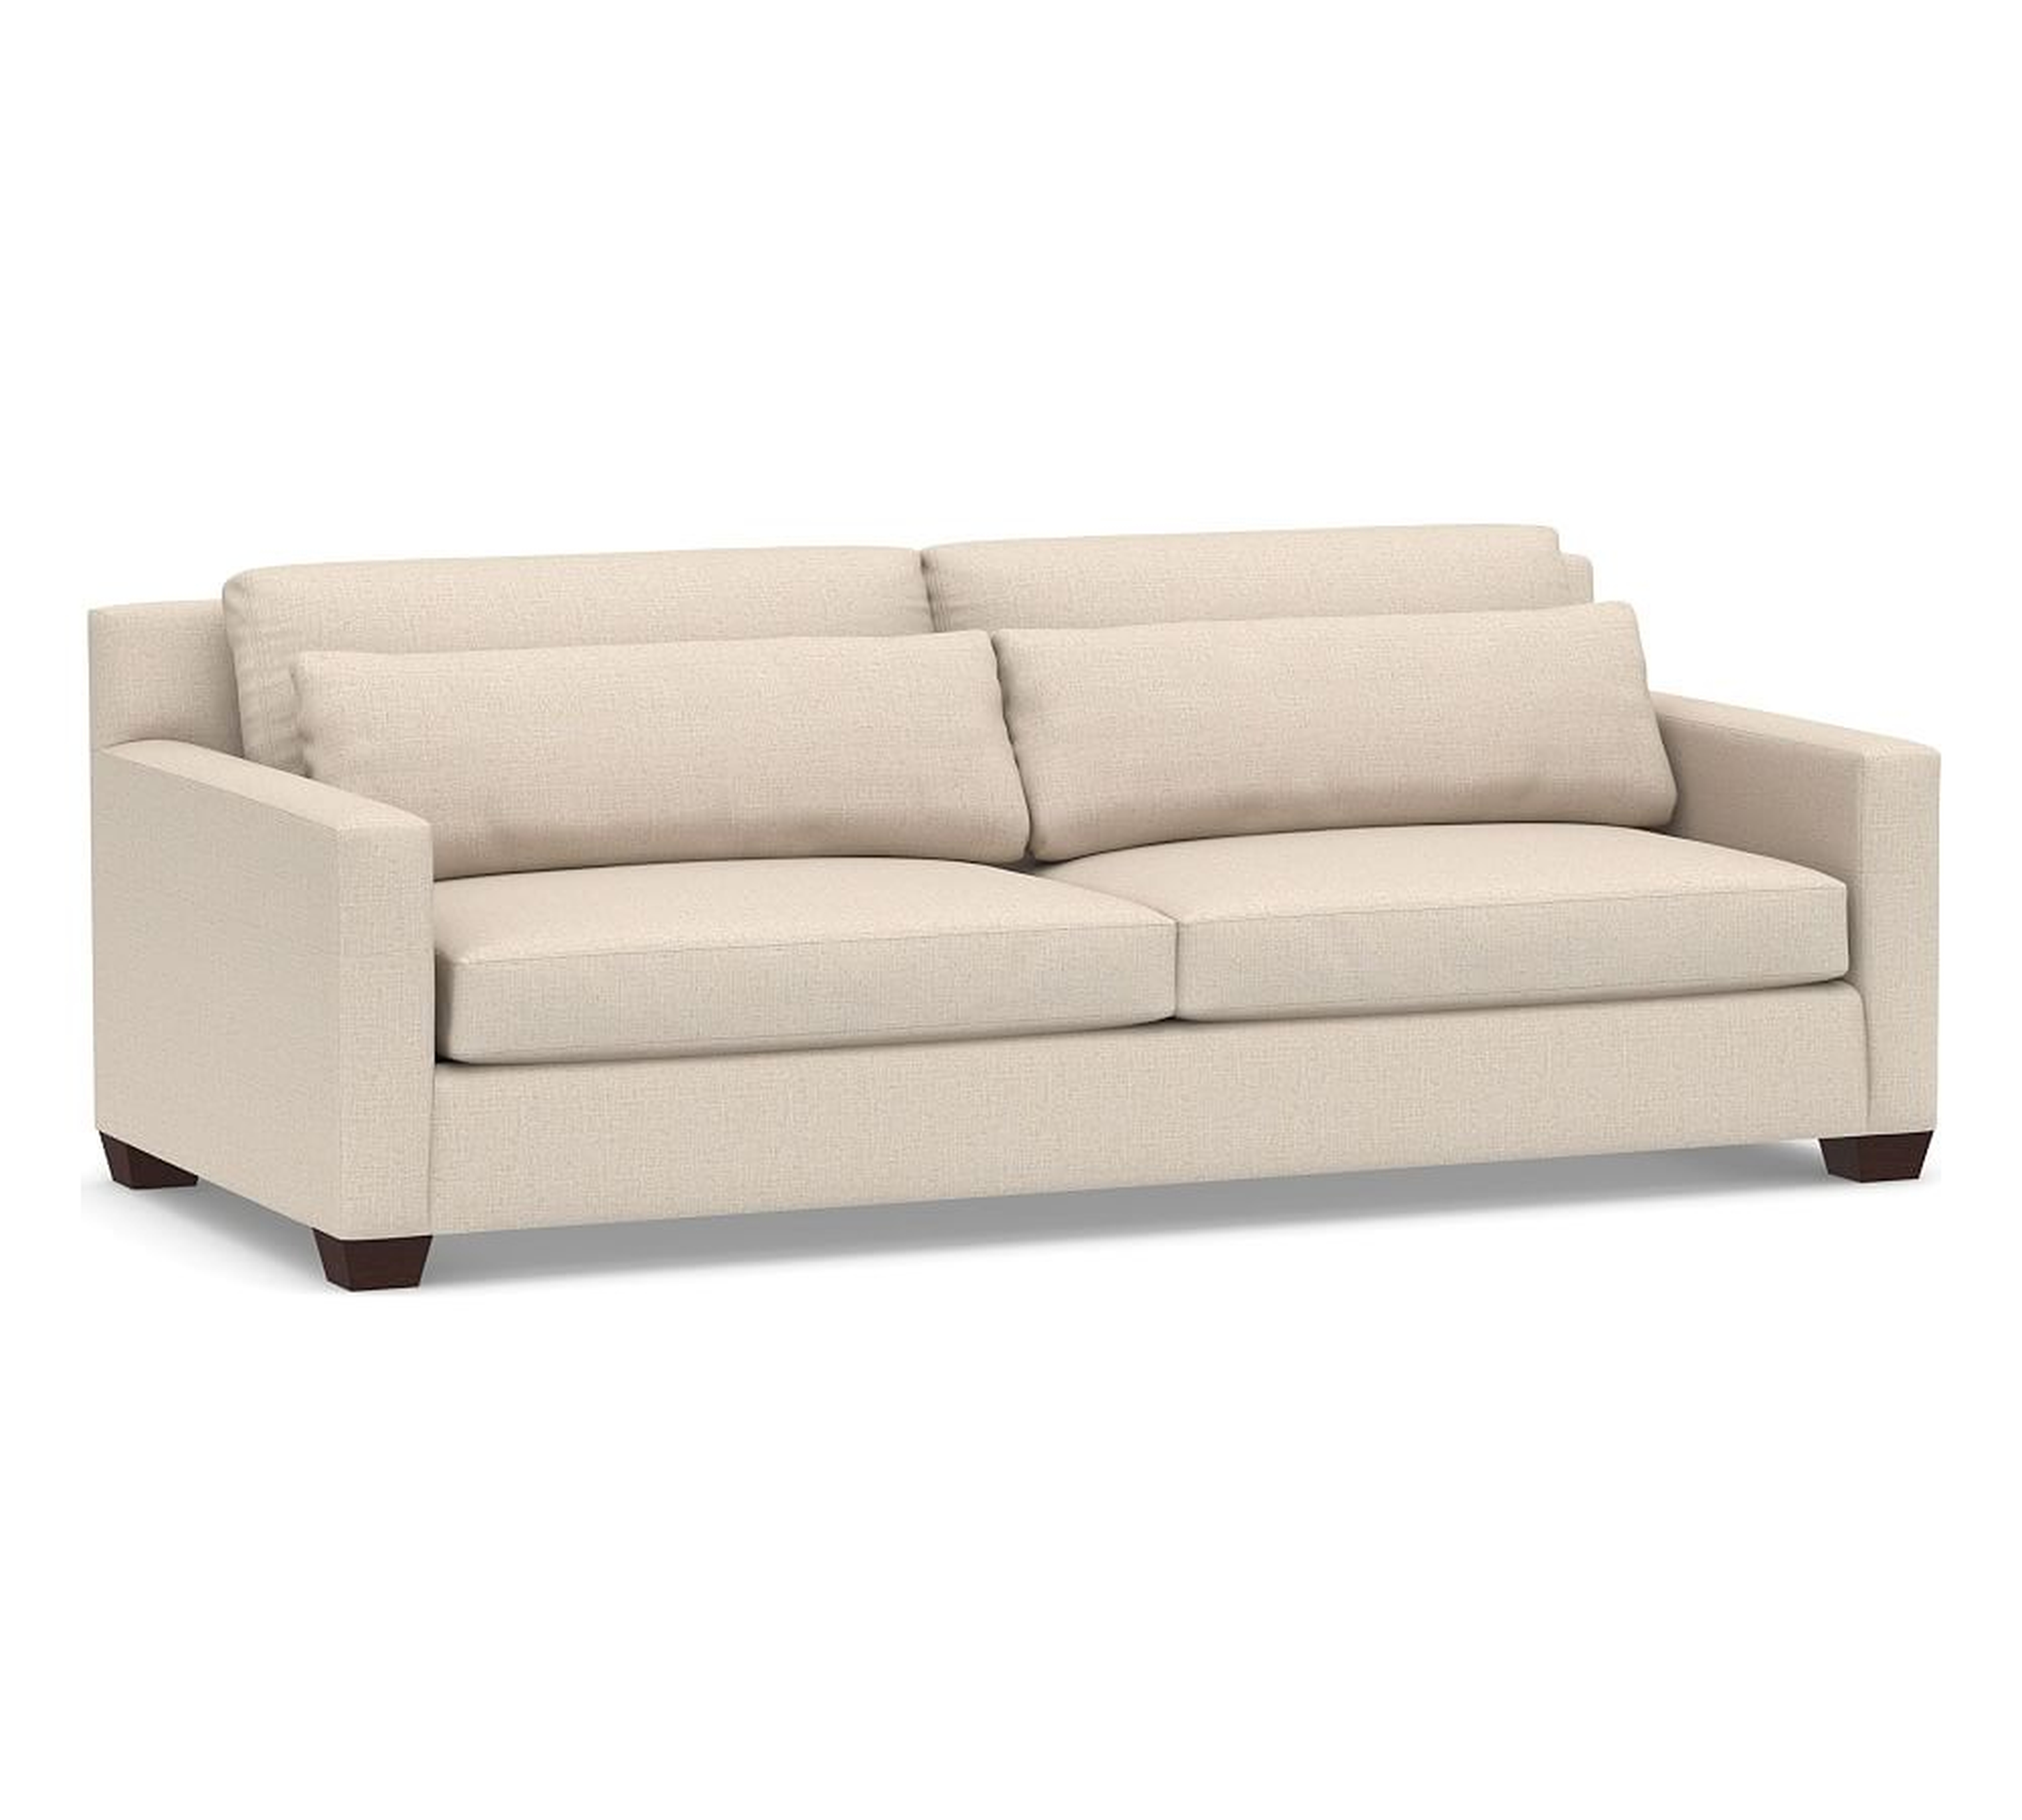 York Square Arm Upholstered Deep Seat Grand Sofa 95" 2-Seater, Down Blend Wrapped Cushions, Performance Everydaylinen(TM) Oatmeal - Pottery Barn